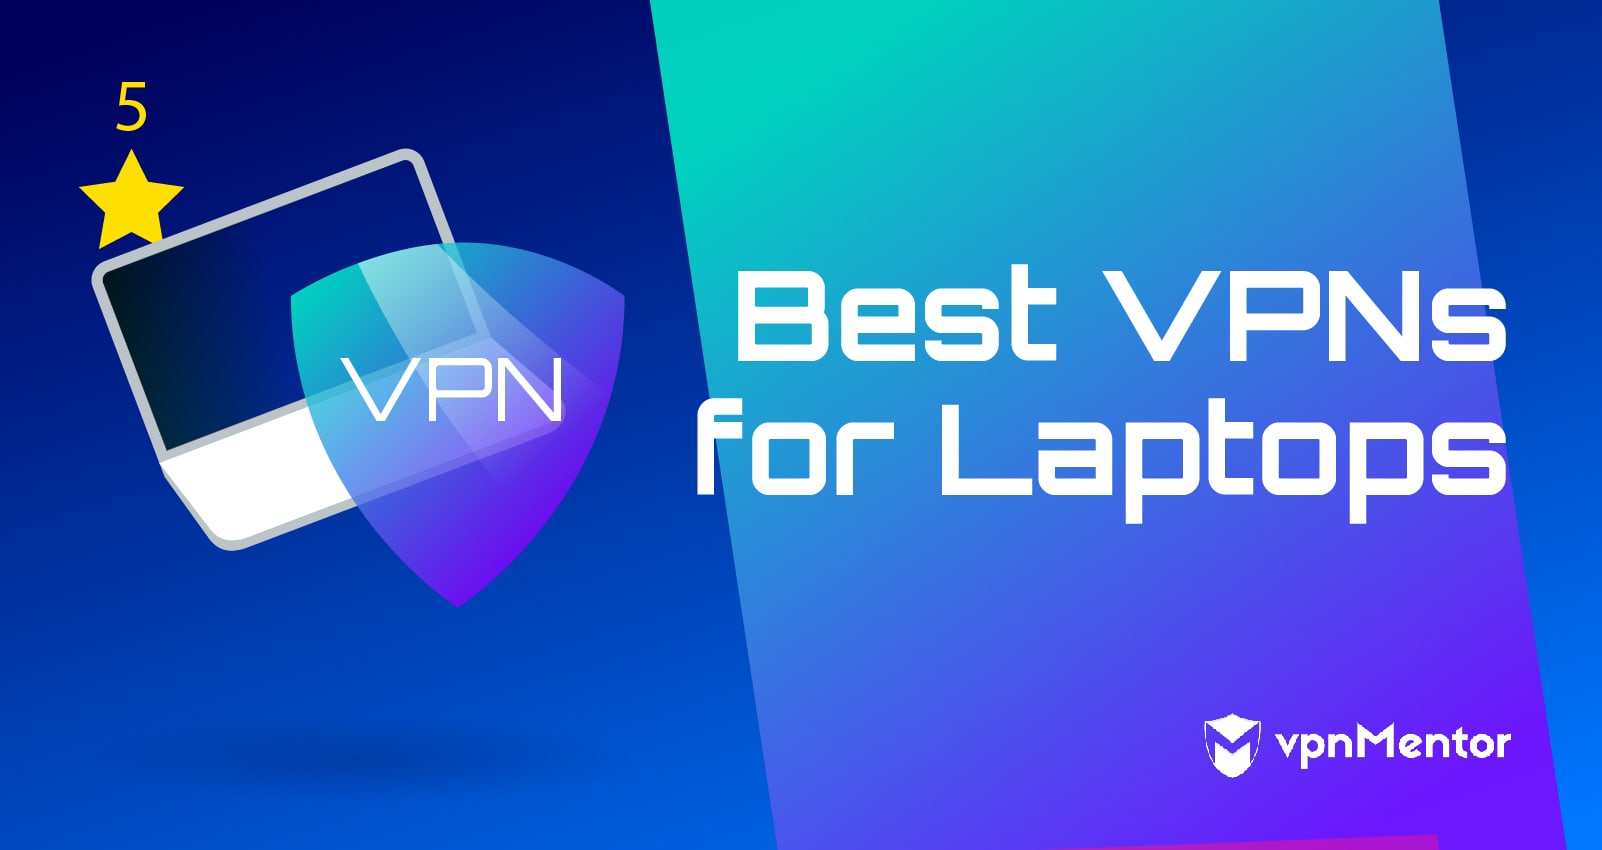 3 Best VPNs For Laptops in 2023 - Choose The Best One for You